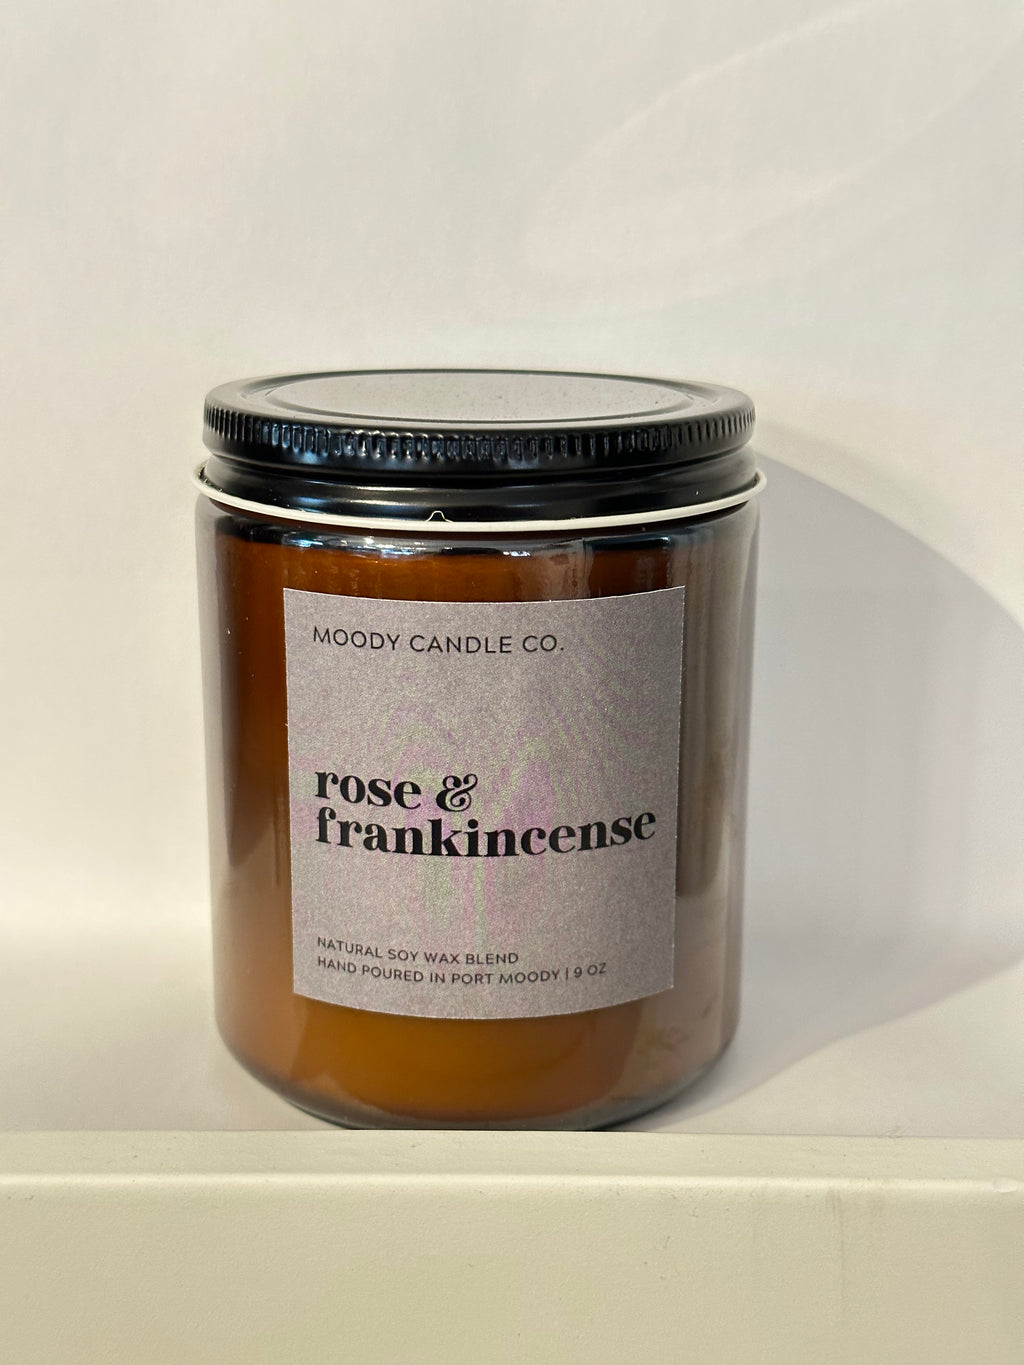 Rose & Frankincense - Glass Jar Candle | Moody Candle Co